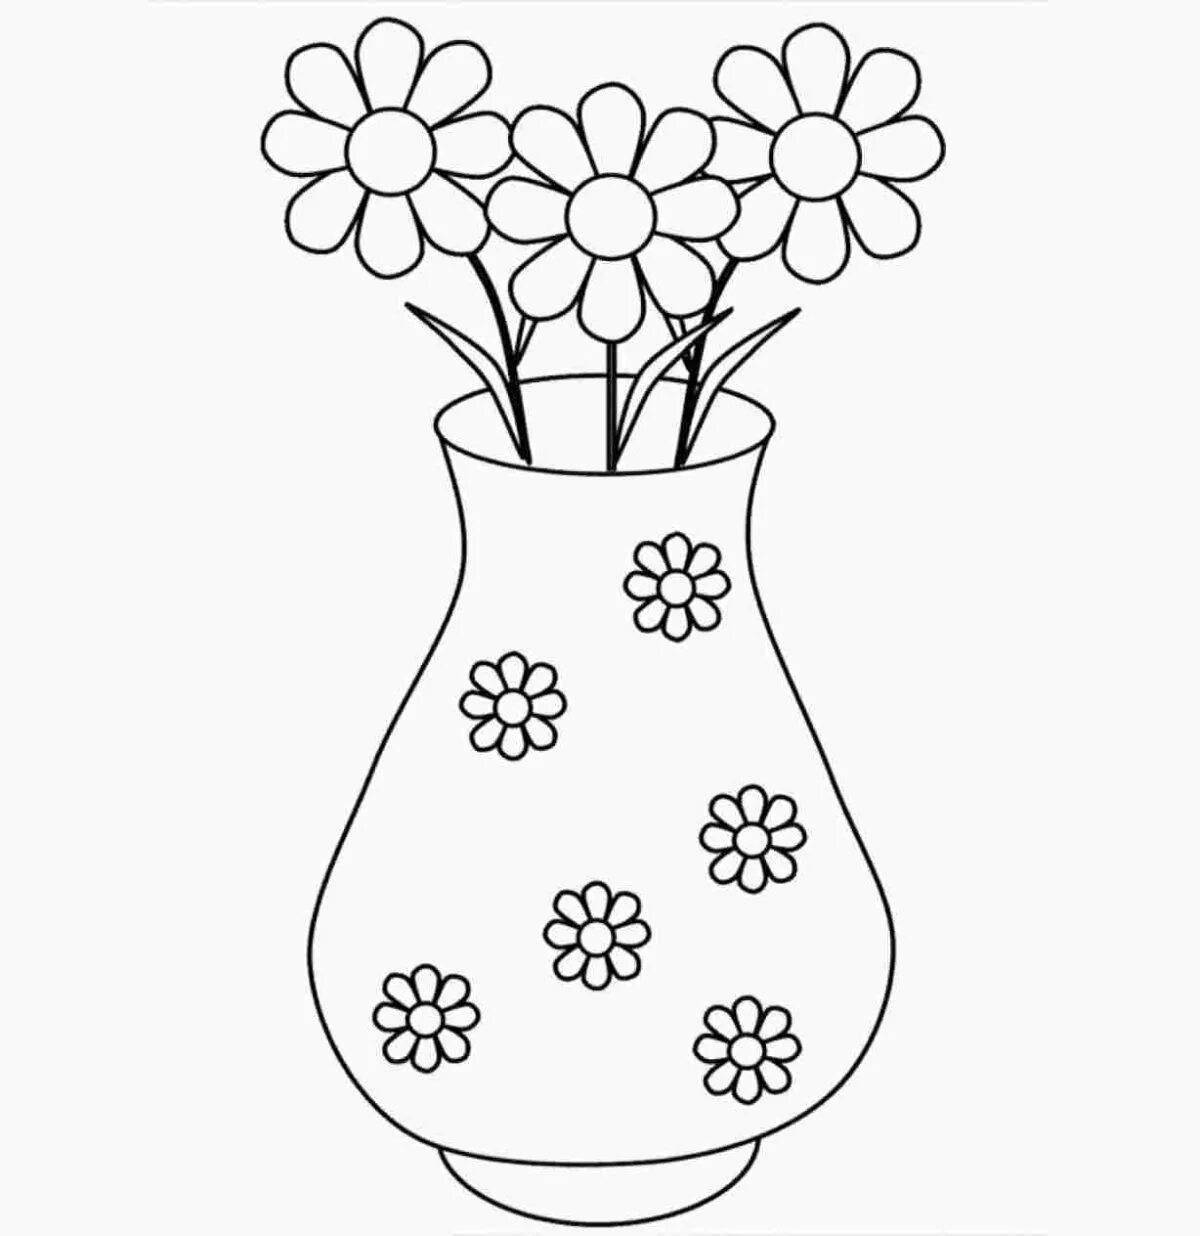 Gorgeous coloring flowers in a vase for babies